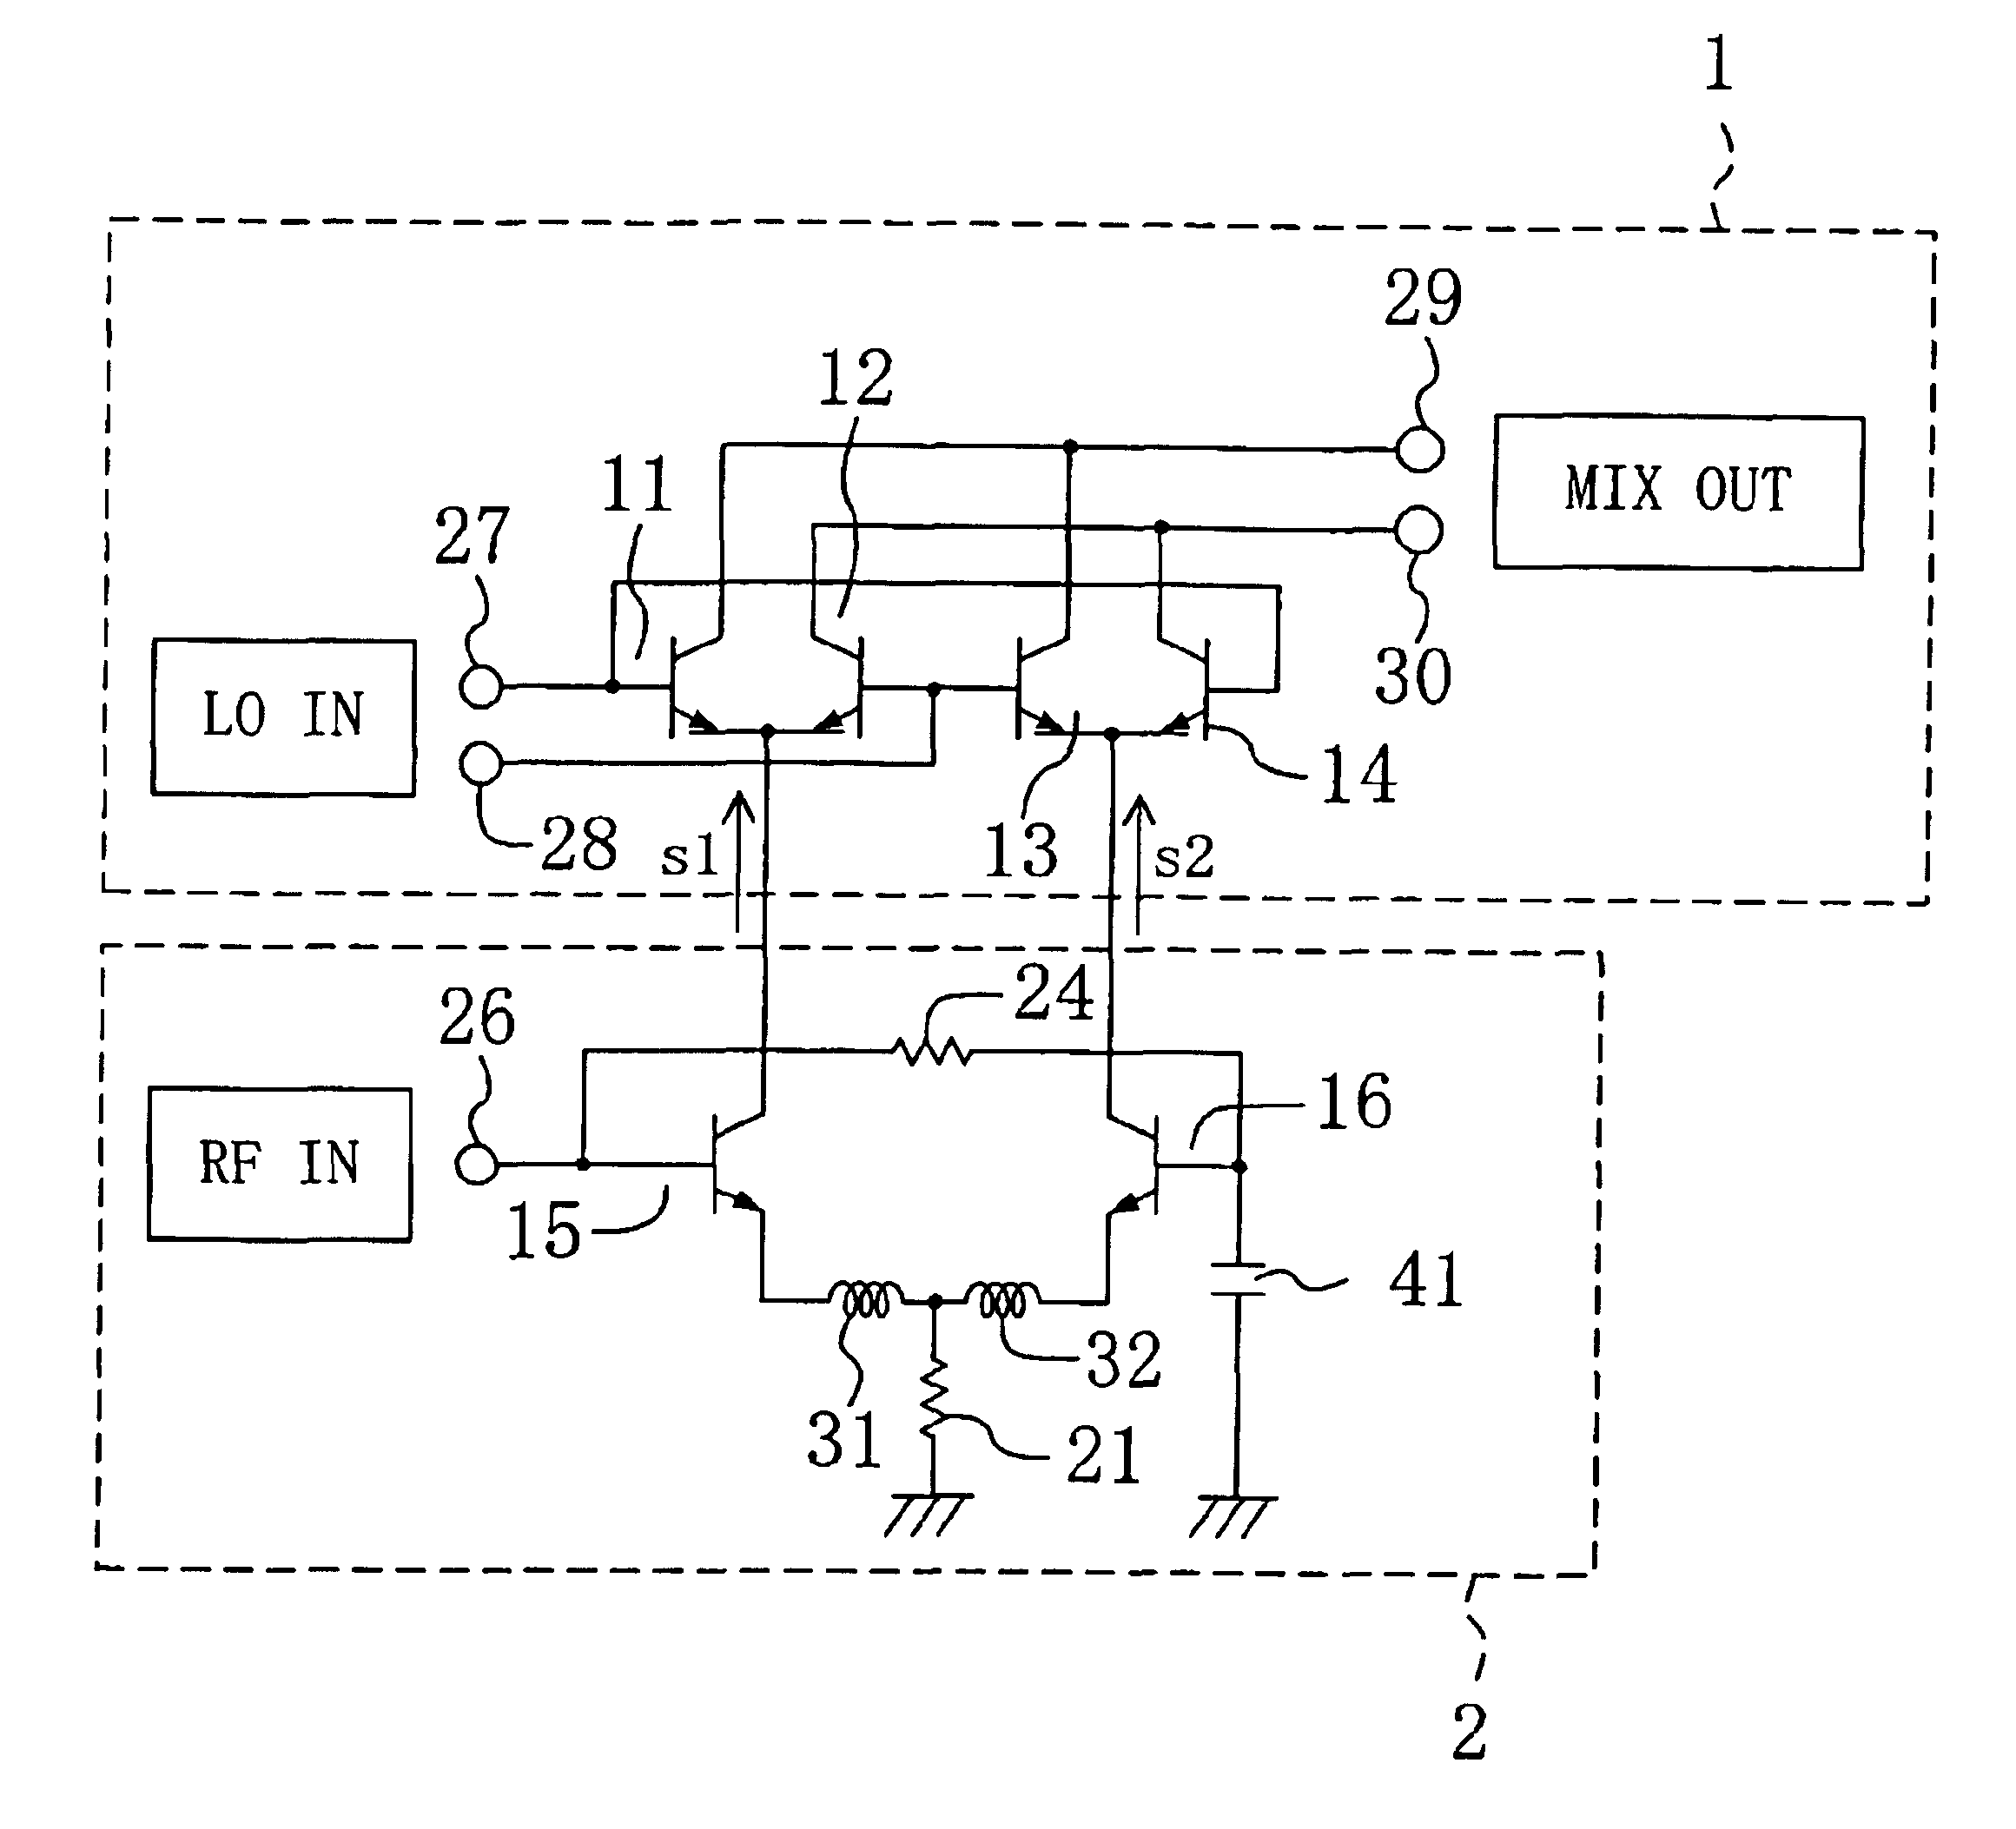 Mixer circuit and differential amplifier circuit